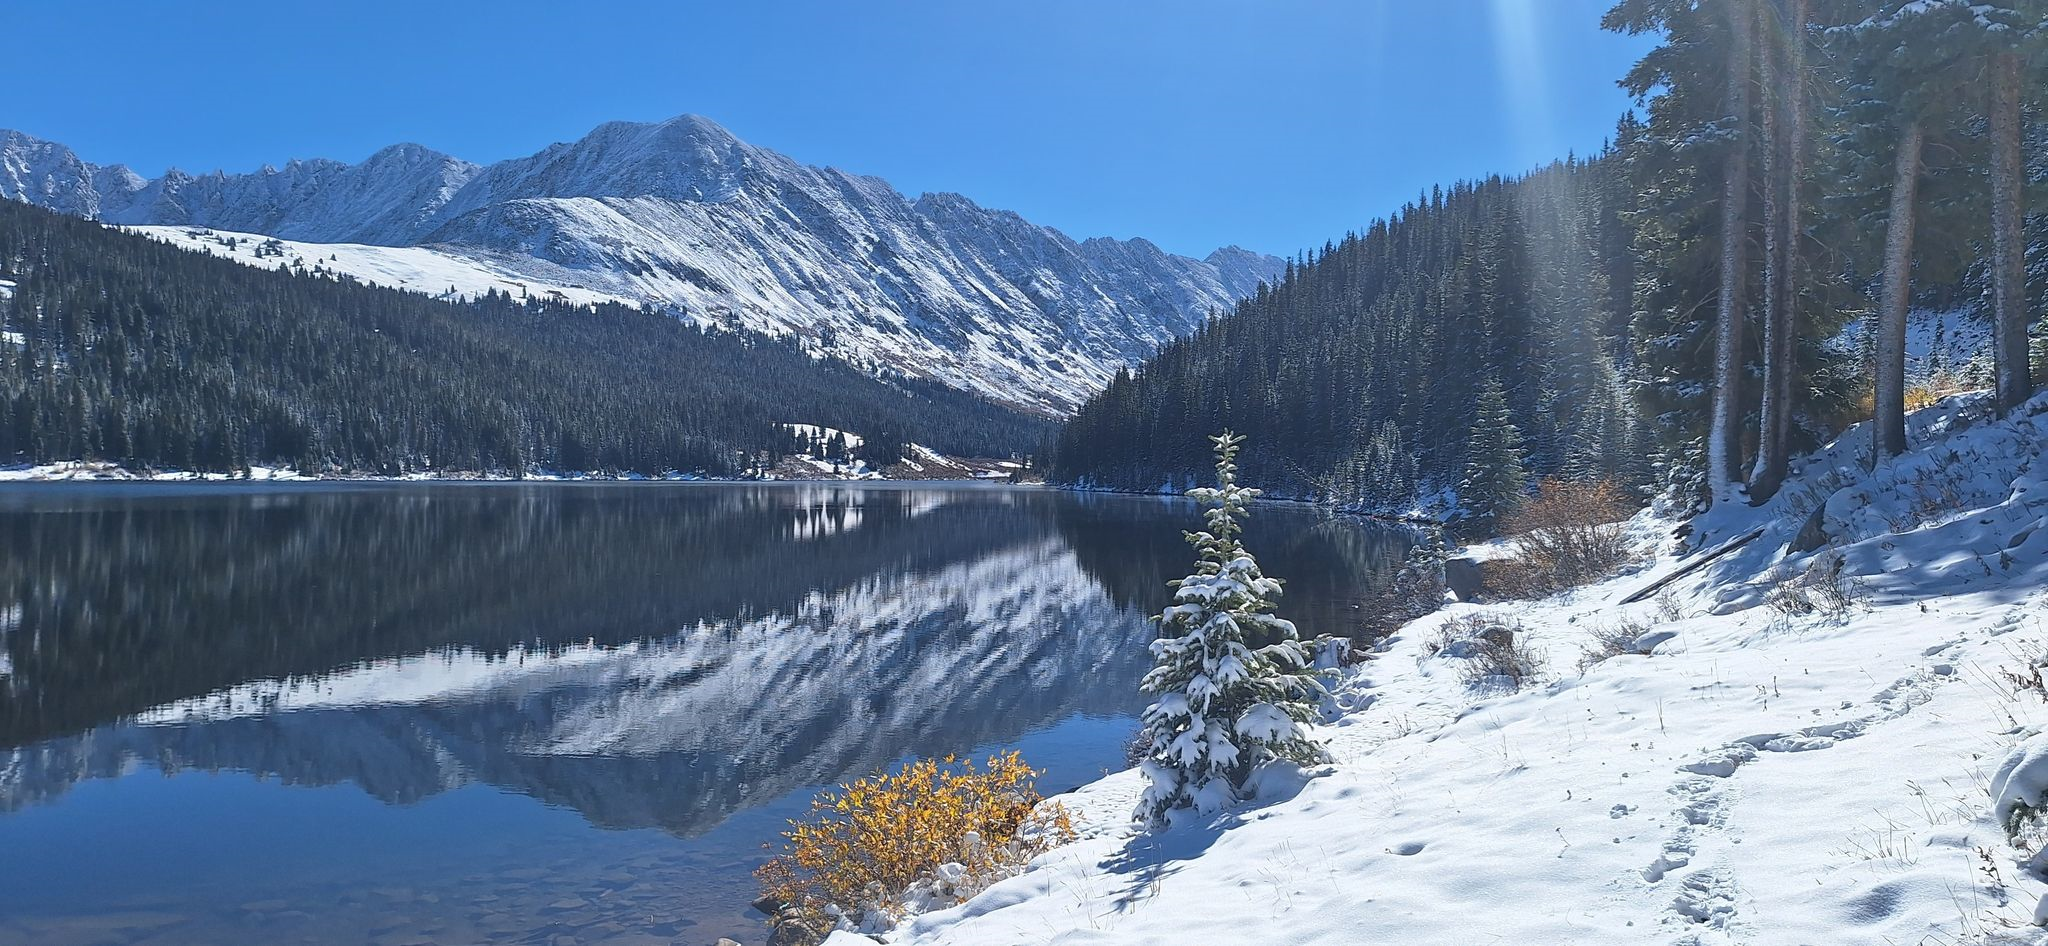 The Best Winter Trails Near Breckenridge for Snowshoeing & Cross-Country Skiing